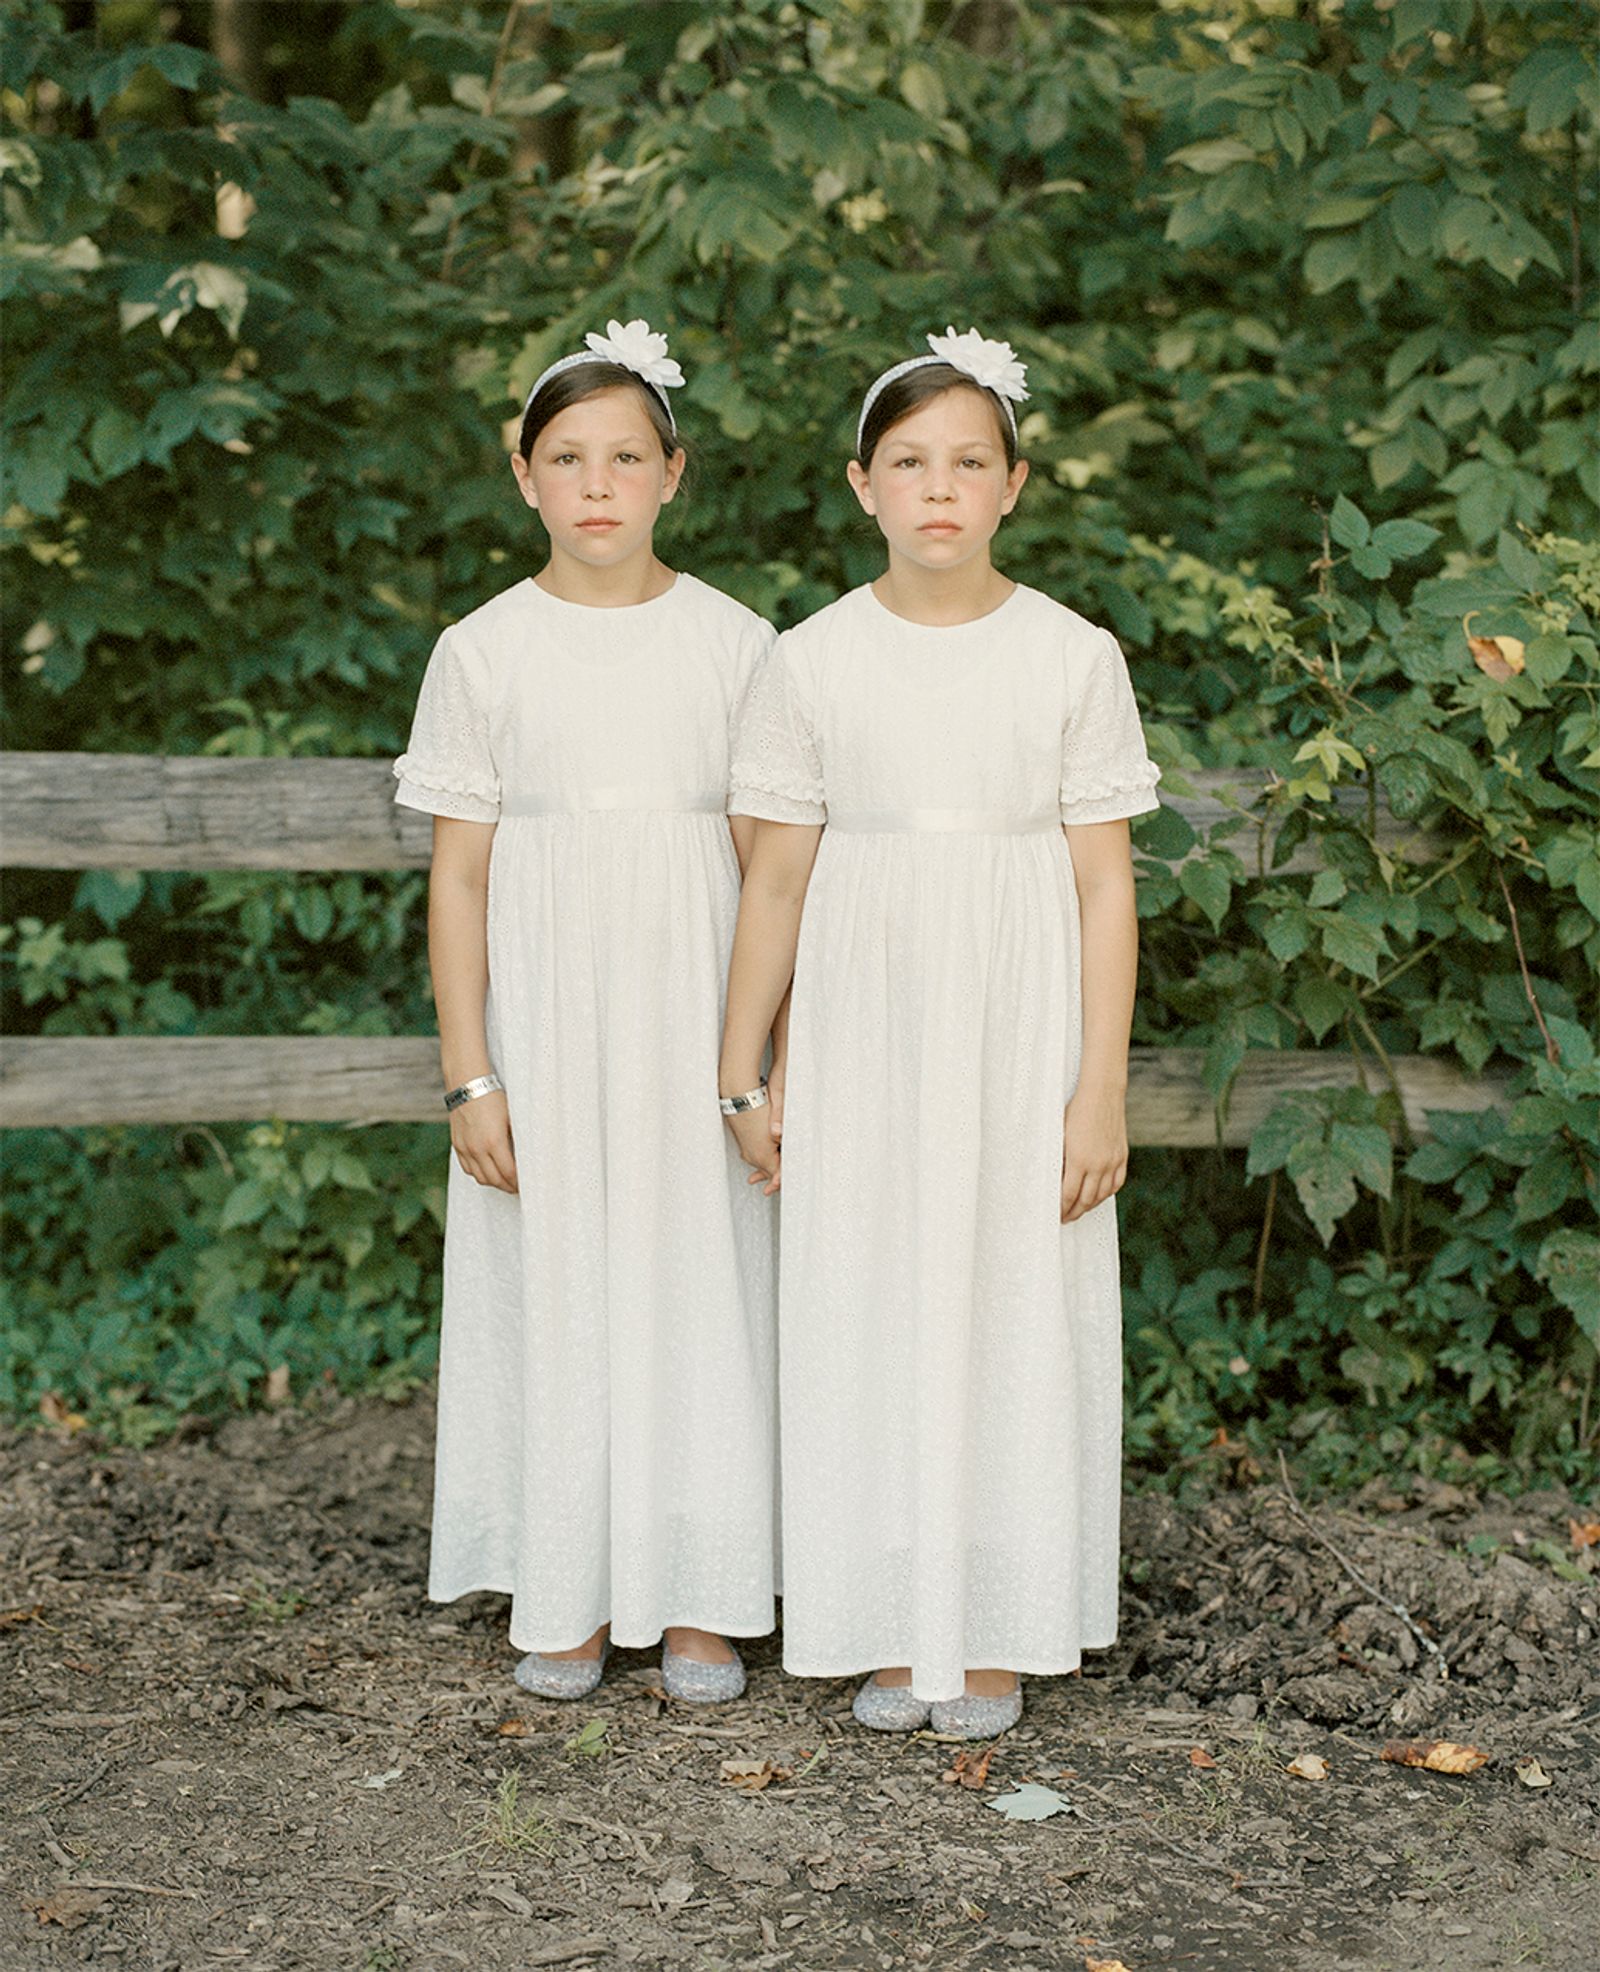 © Josie Gealer Ng - Young Twins from the Amish community, Twinsburg Ohio 2019.